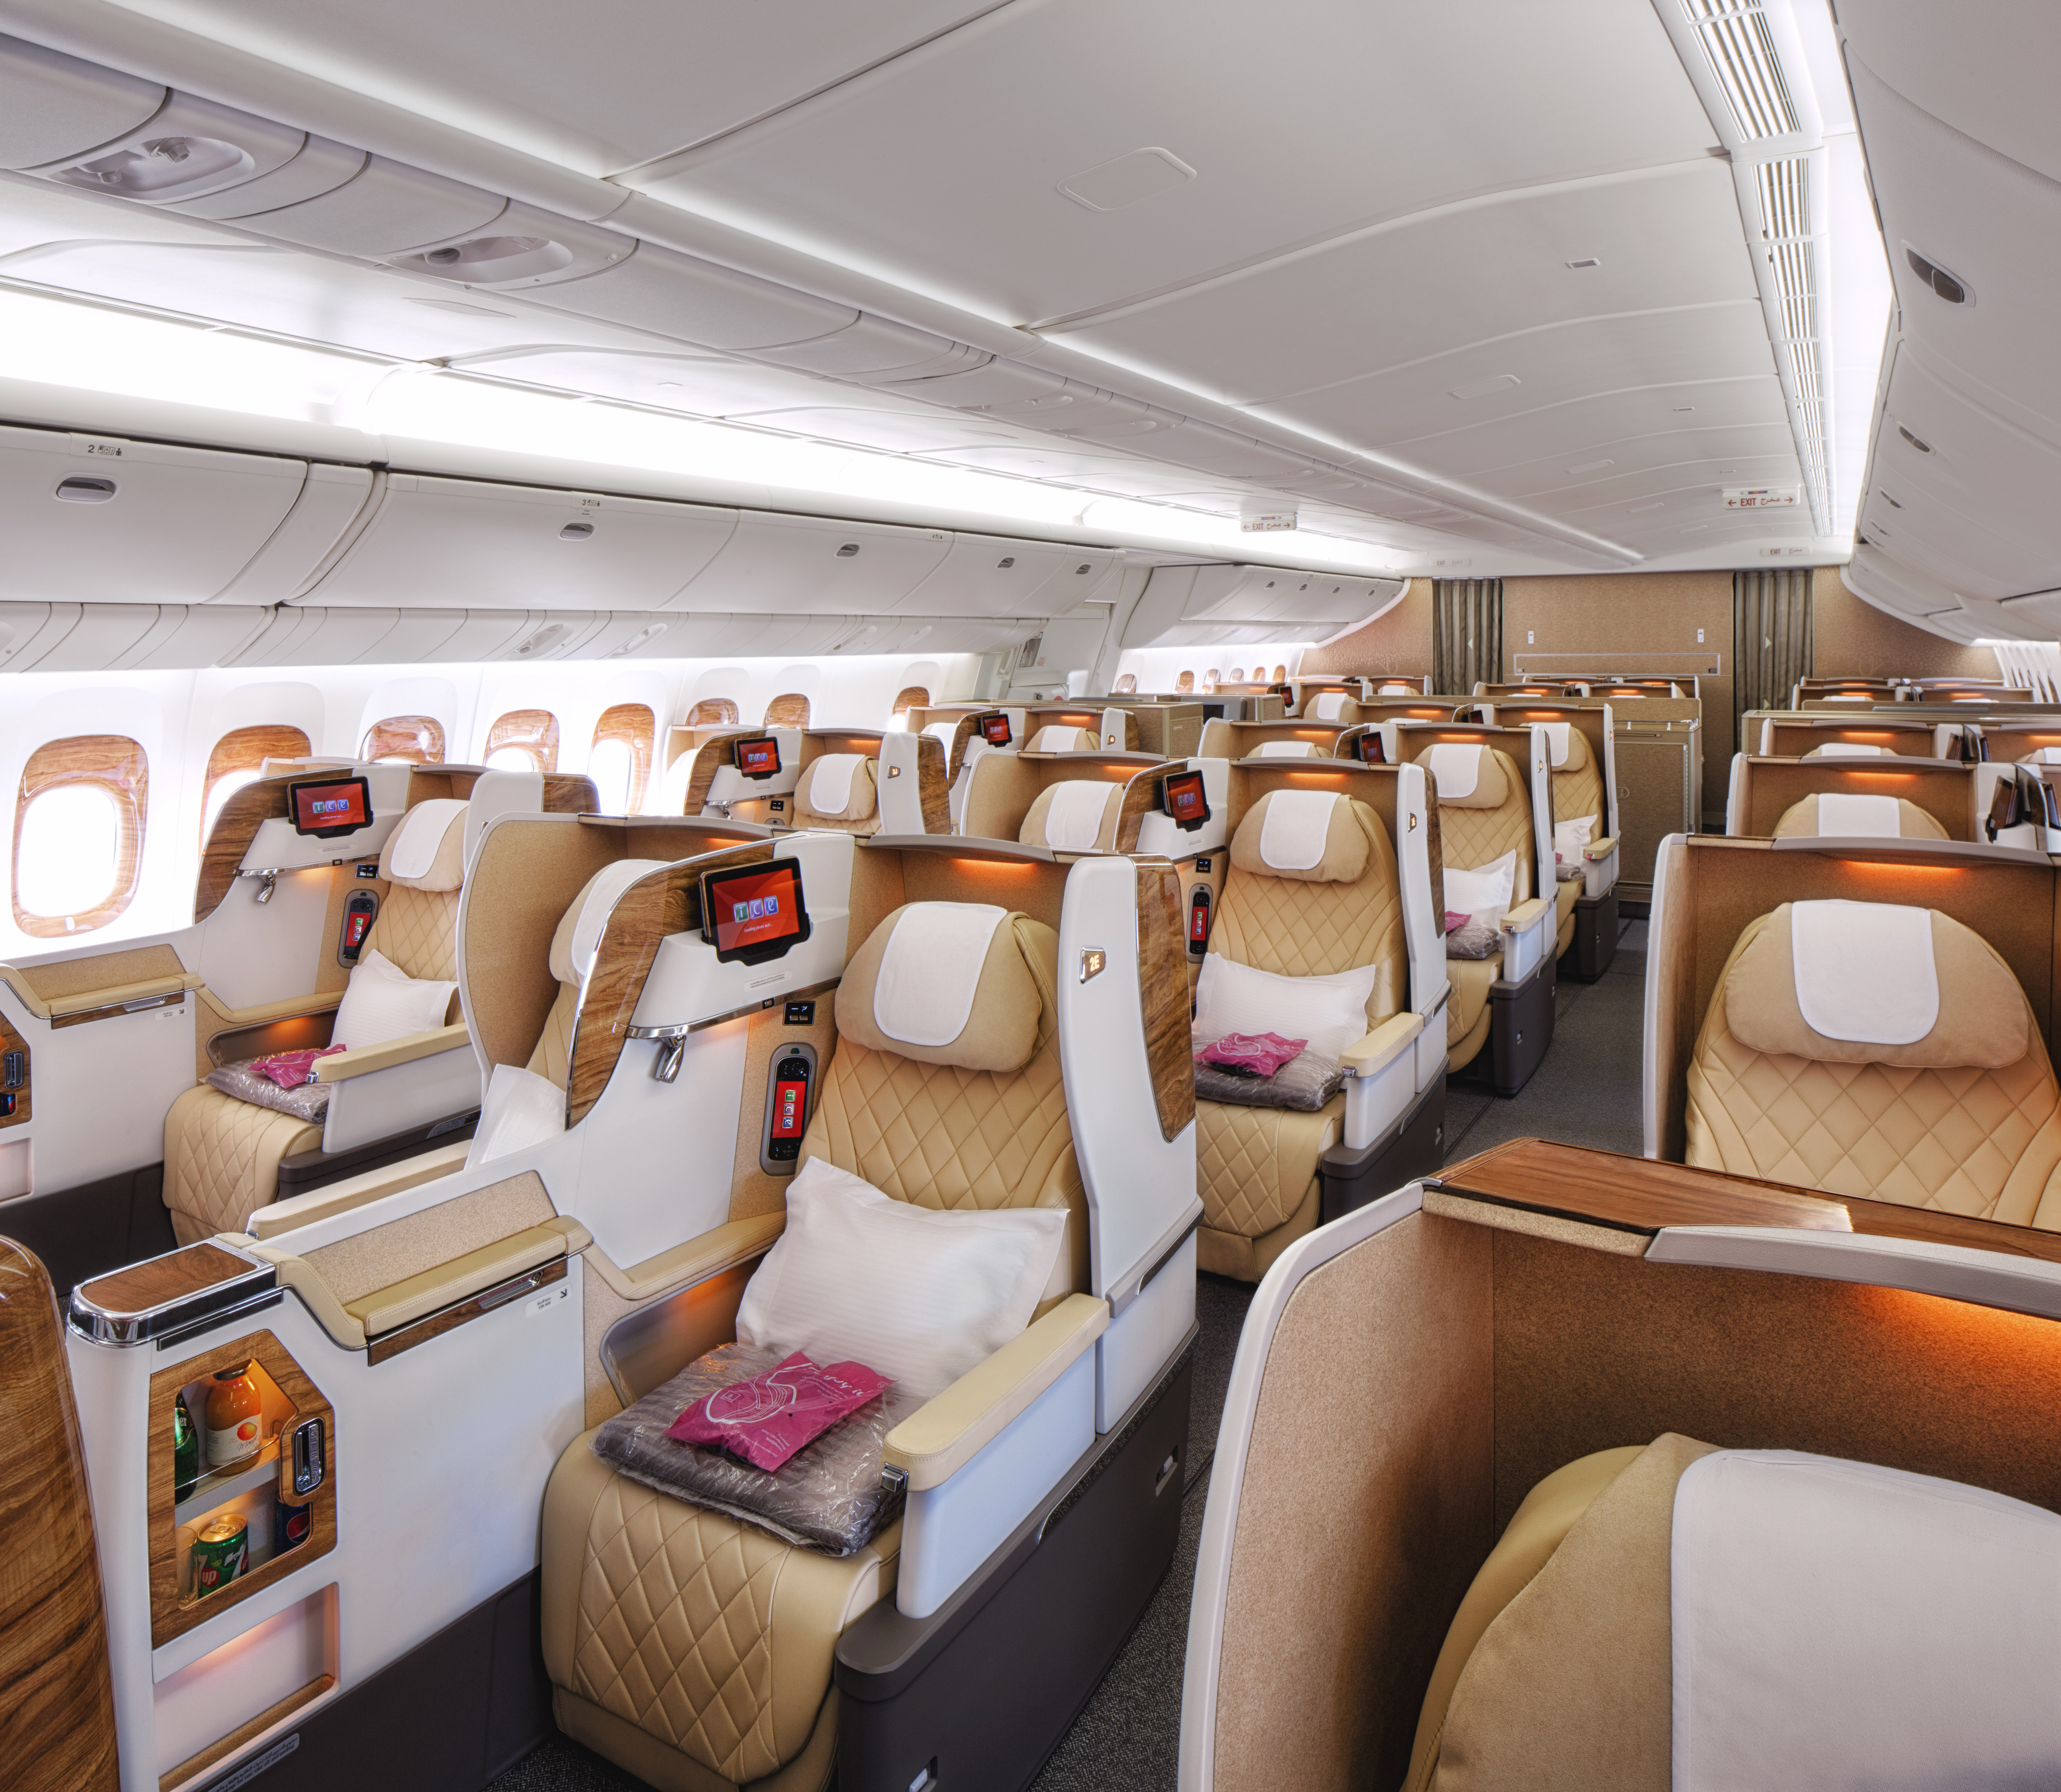 Emirates To Introduce Six Across Business Class Seating On Its Boeing 777 200lr Aircraft Economy Beyond